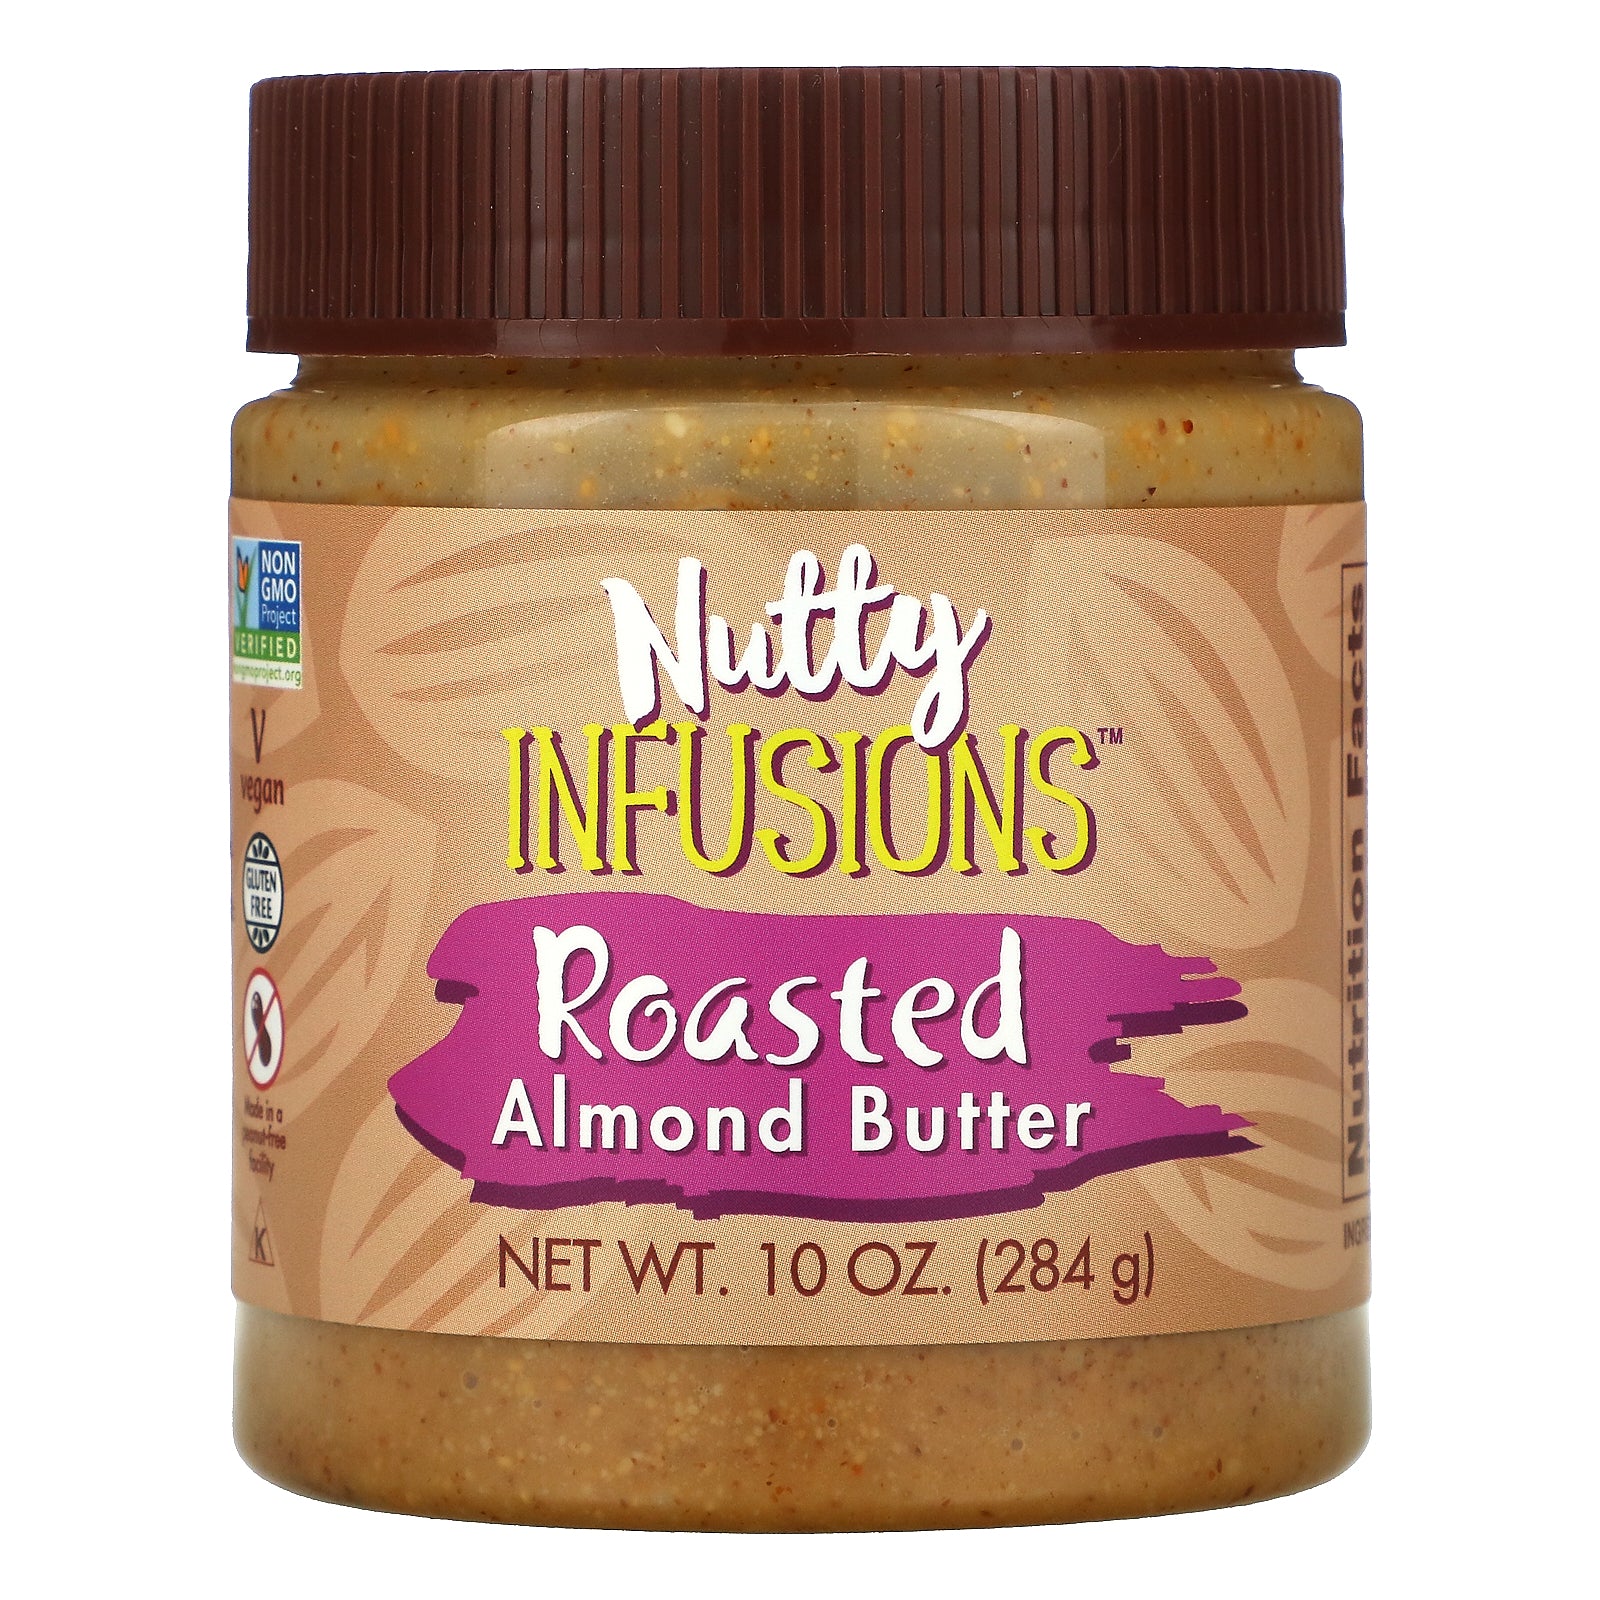 Now Foods, Nutty Infusions, Roasted Almond Butter, 10 oz (284 g)